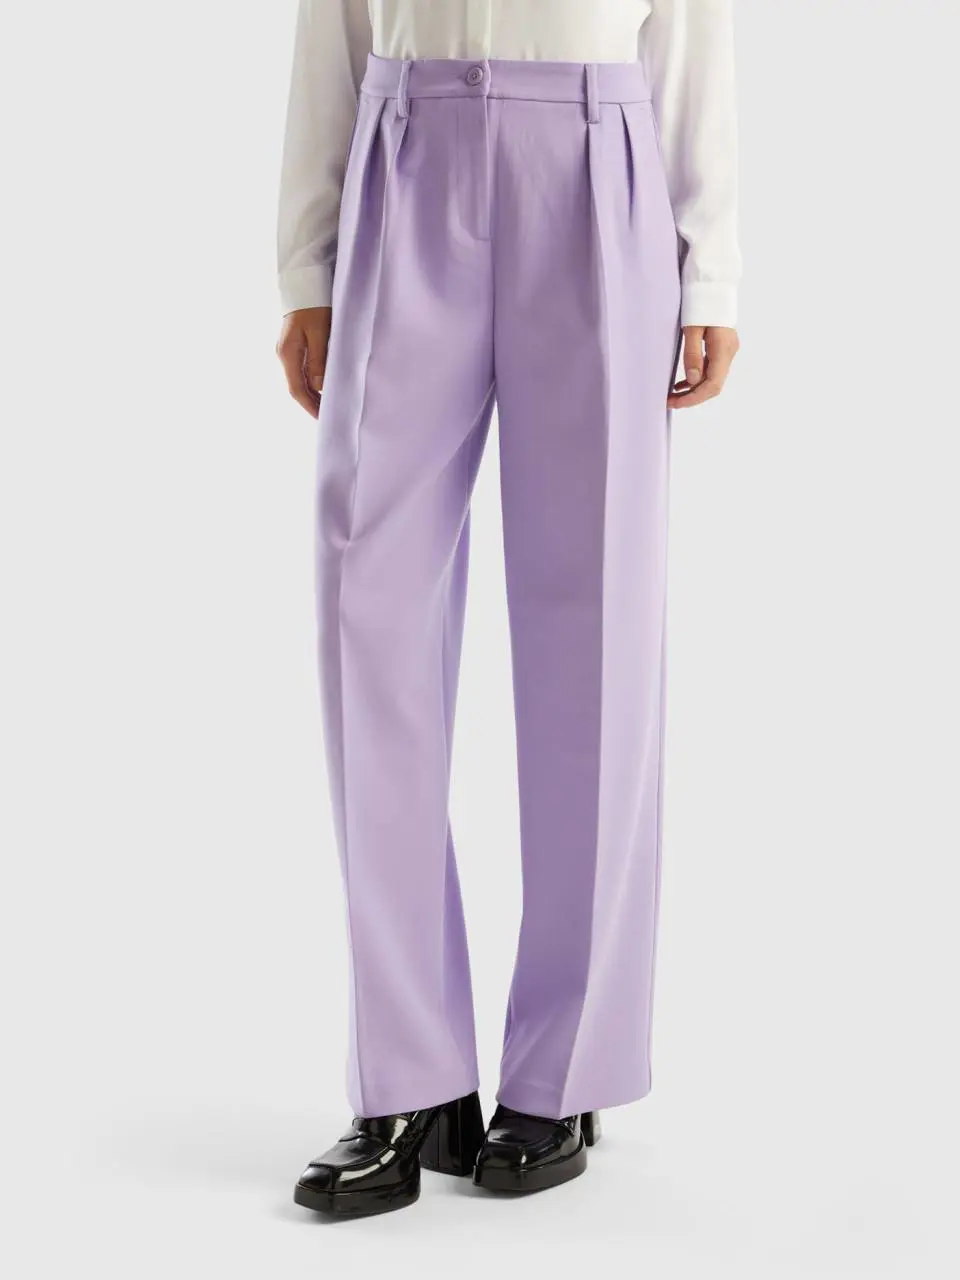 Benetton wide trousers with pleats. 1